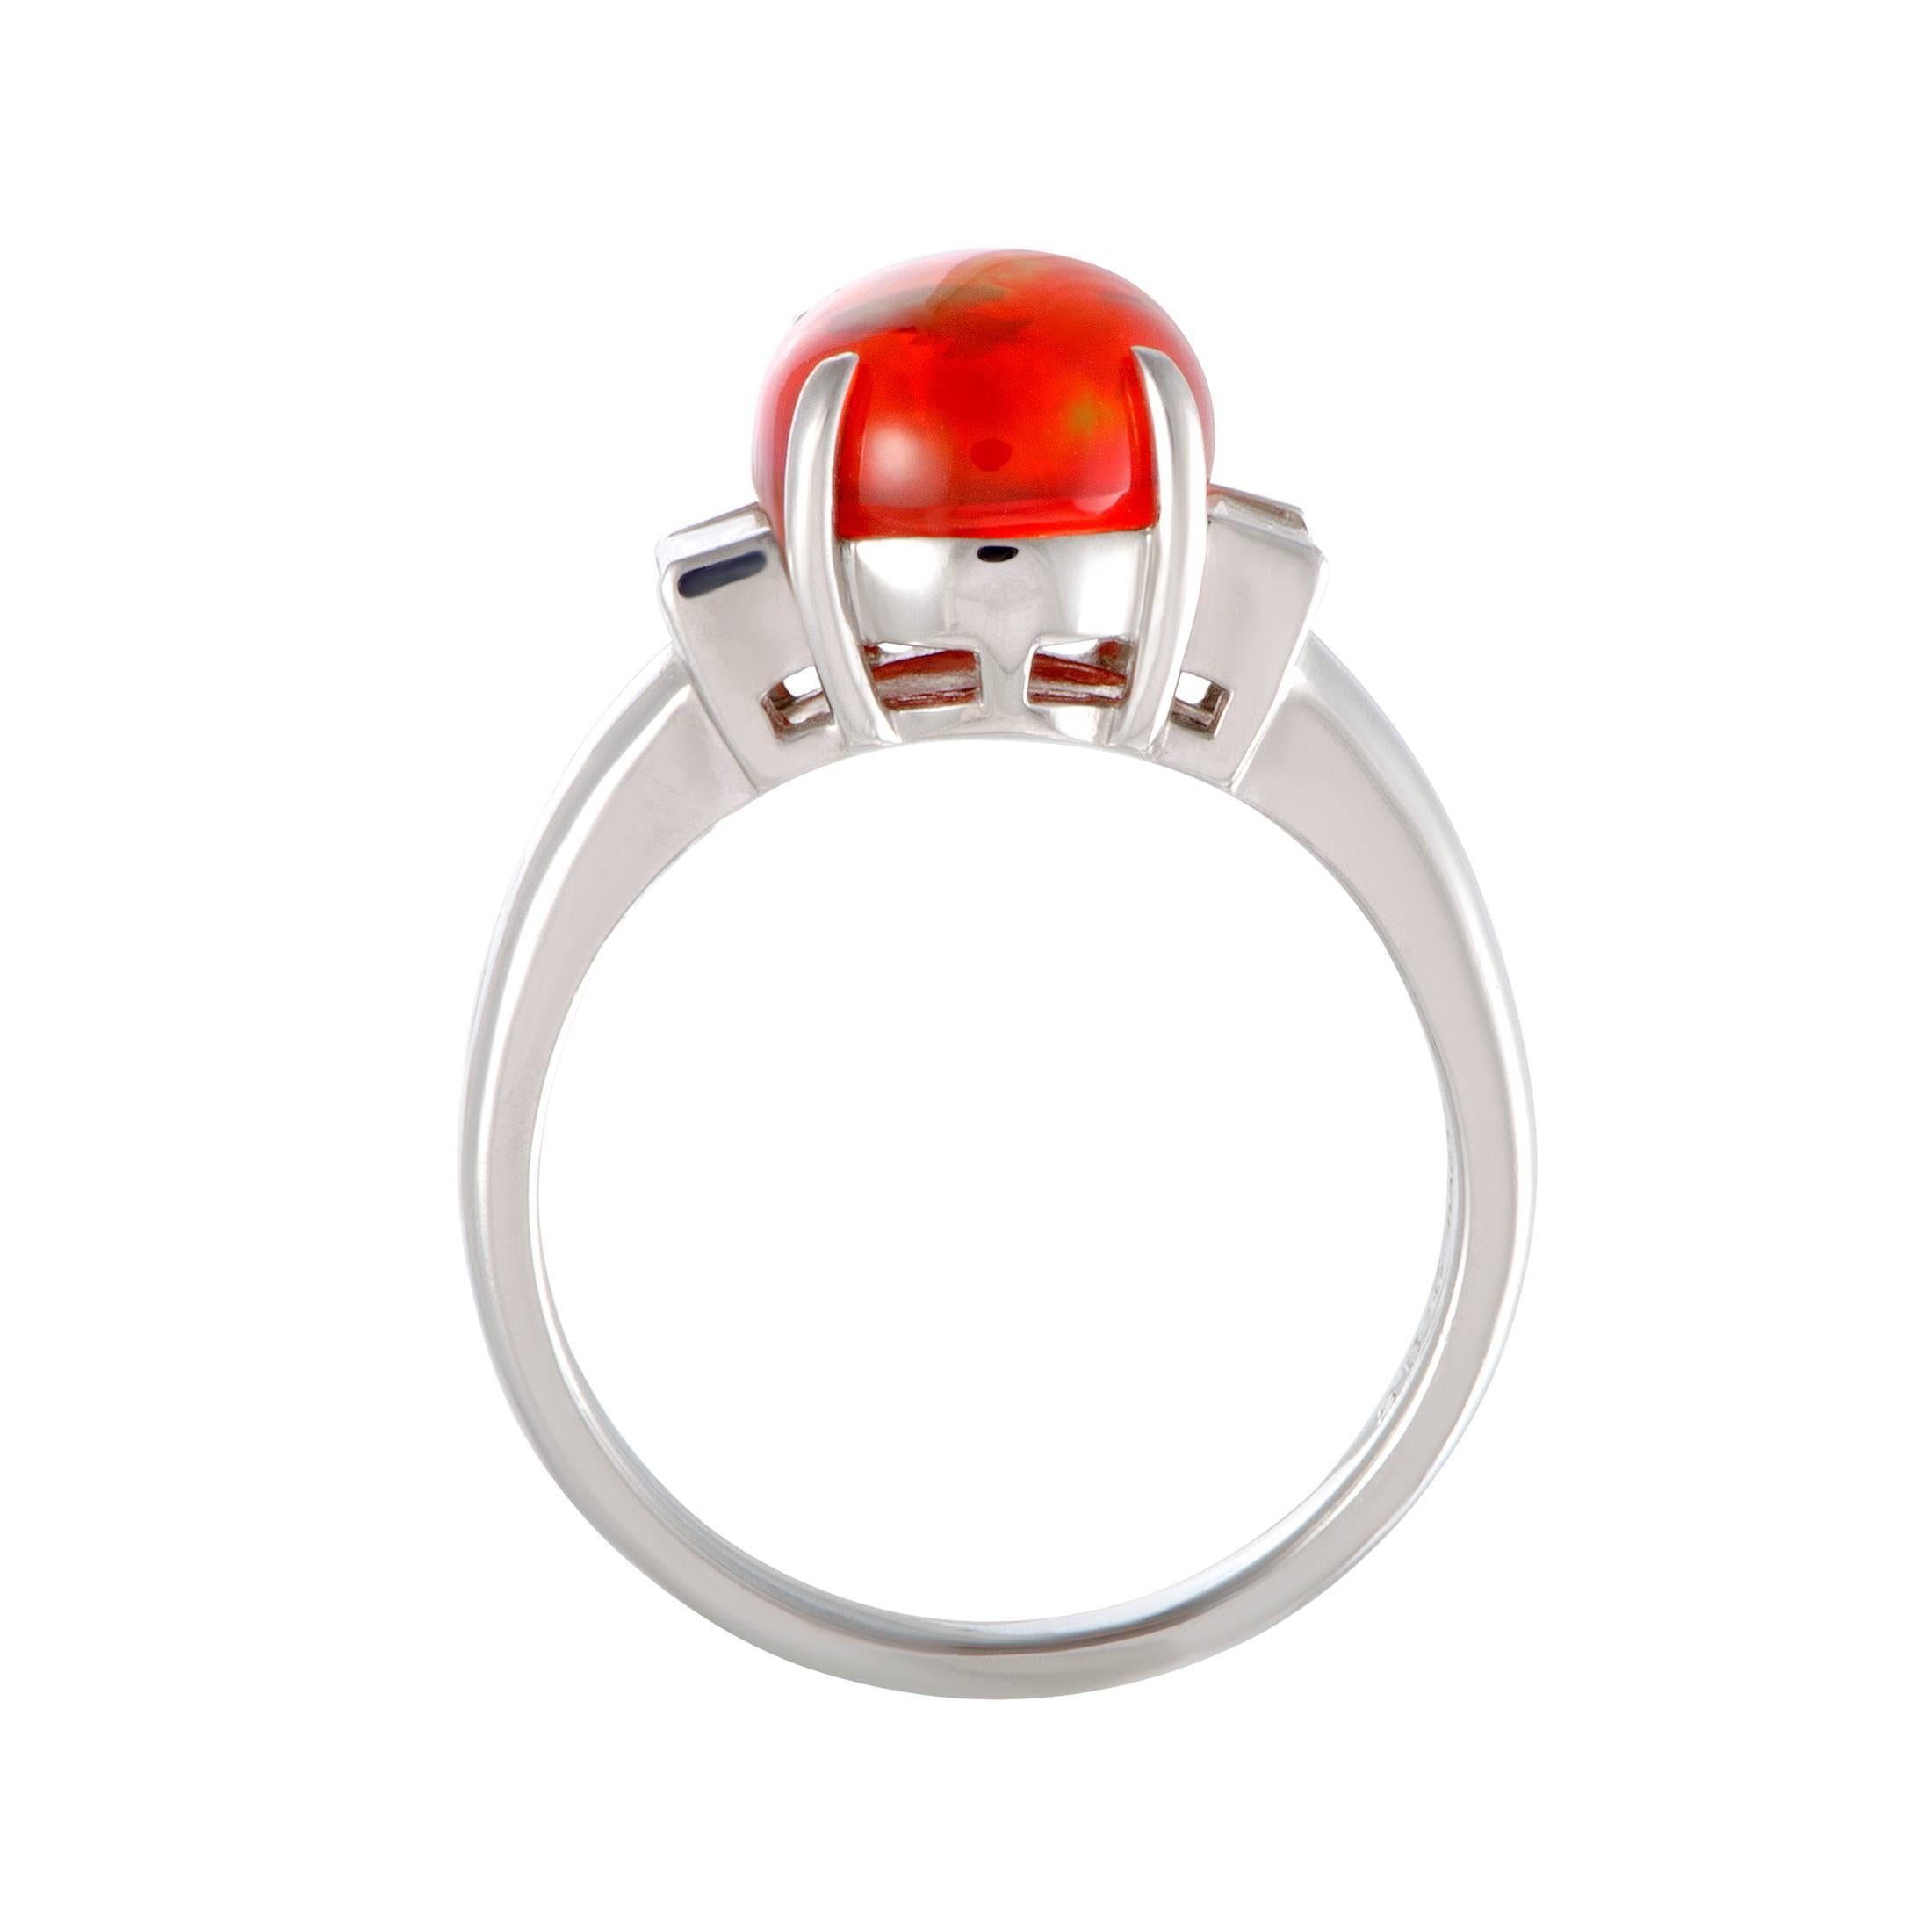 Captivating your gaze in the most stylish manner, the fire opal adds a compelling pop of color to this splendid platinum ring. The opal weighs 2.85 carats, and it is accompanied by diamonds that amount to 0.30 carats.
Ring Top Dimensions: 10mm x